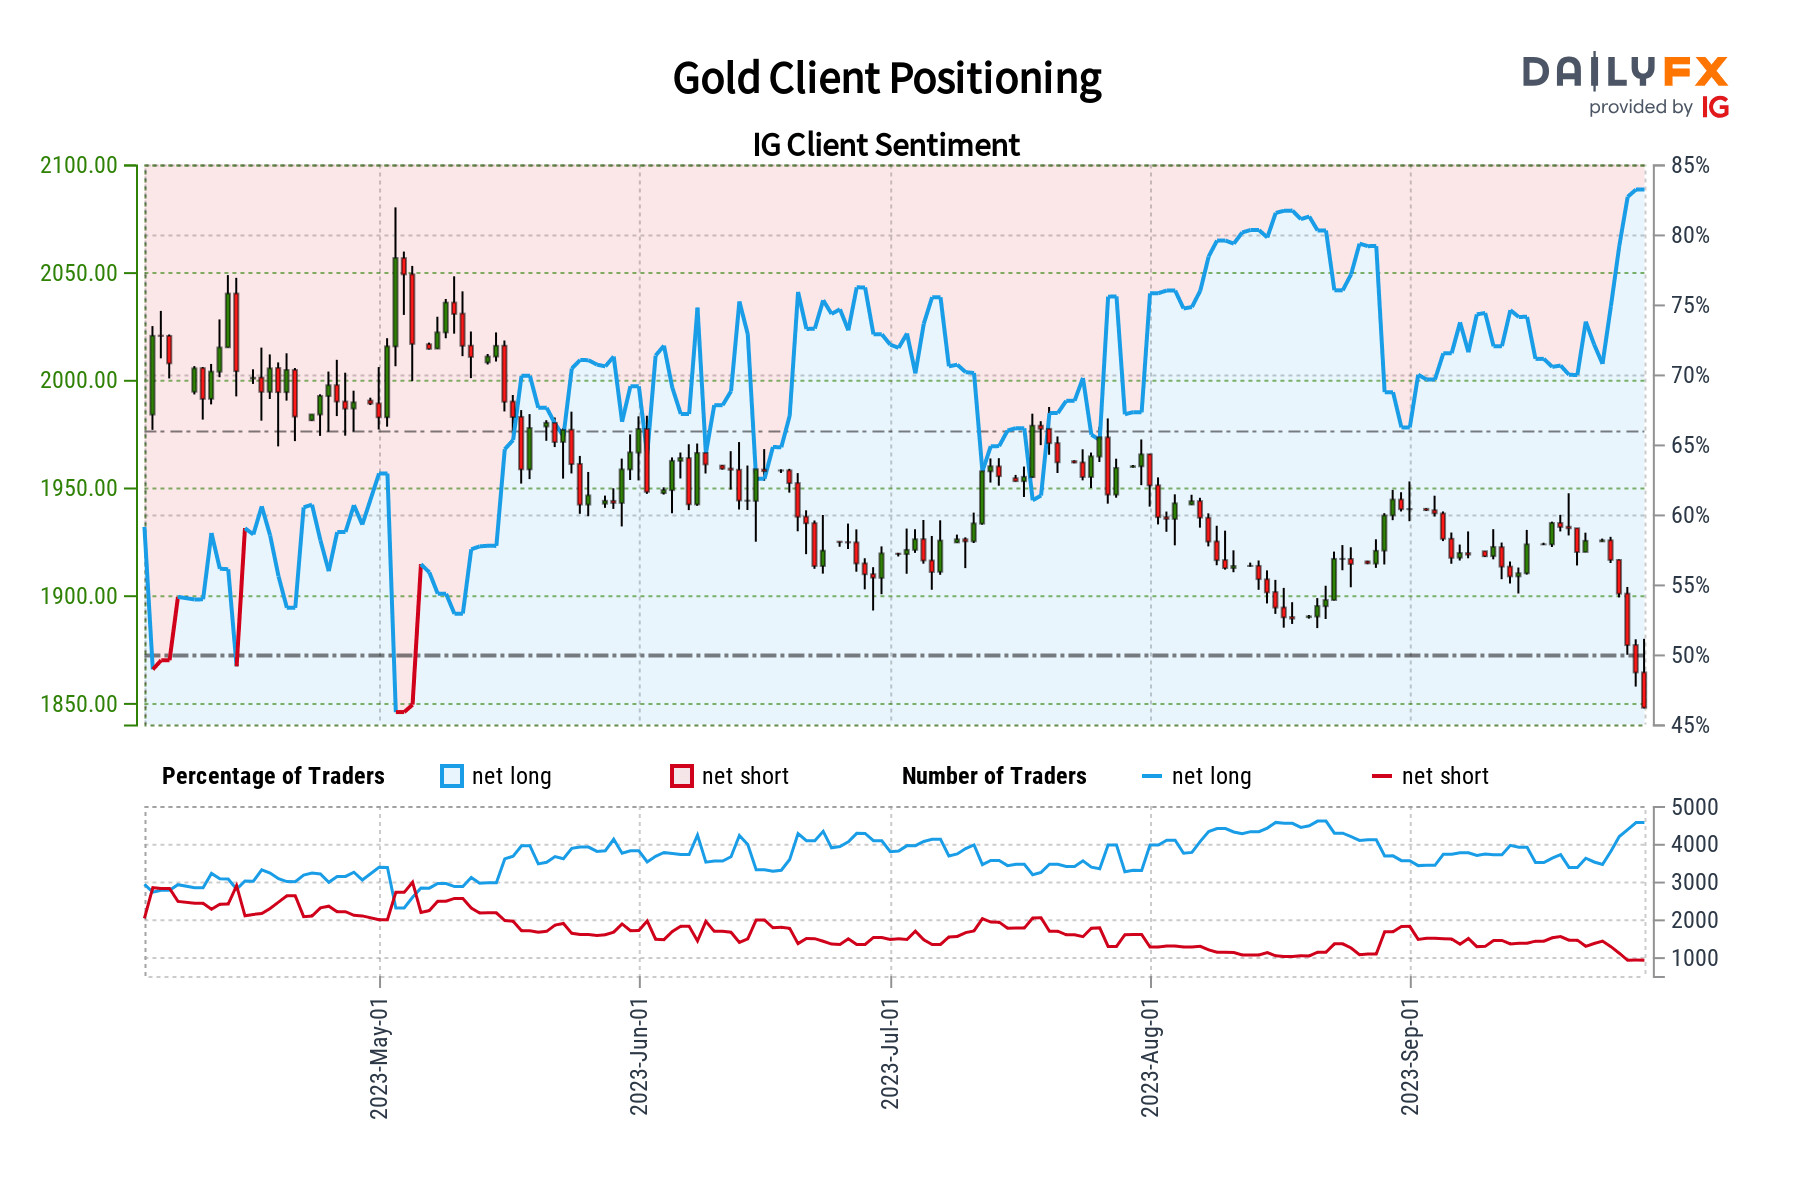 Gold Client Positioning